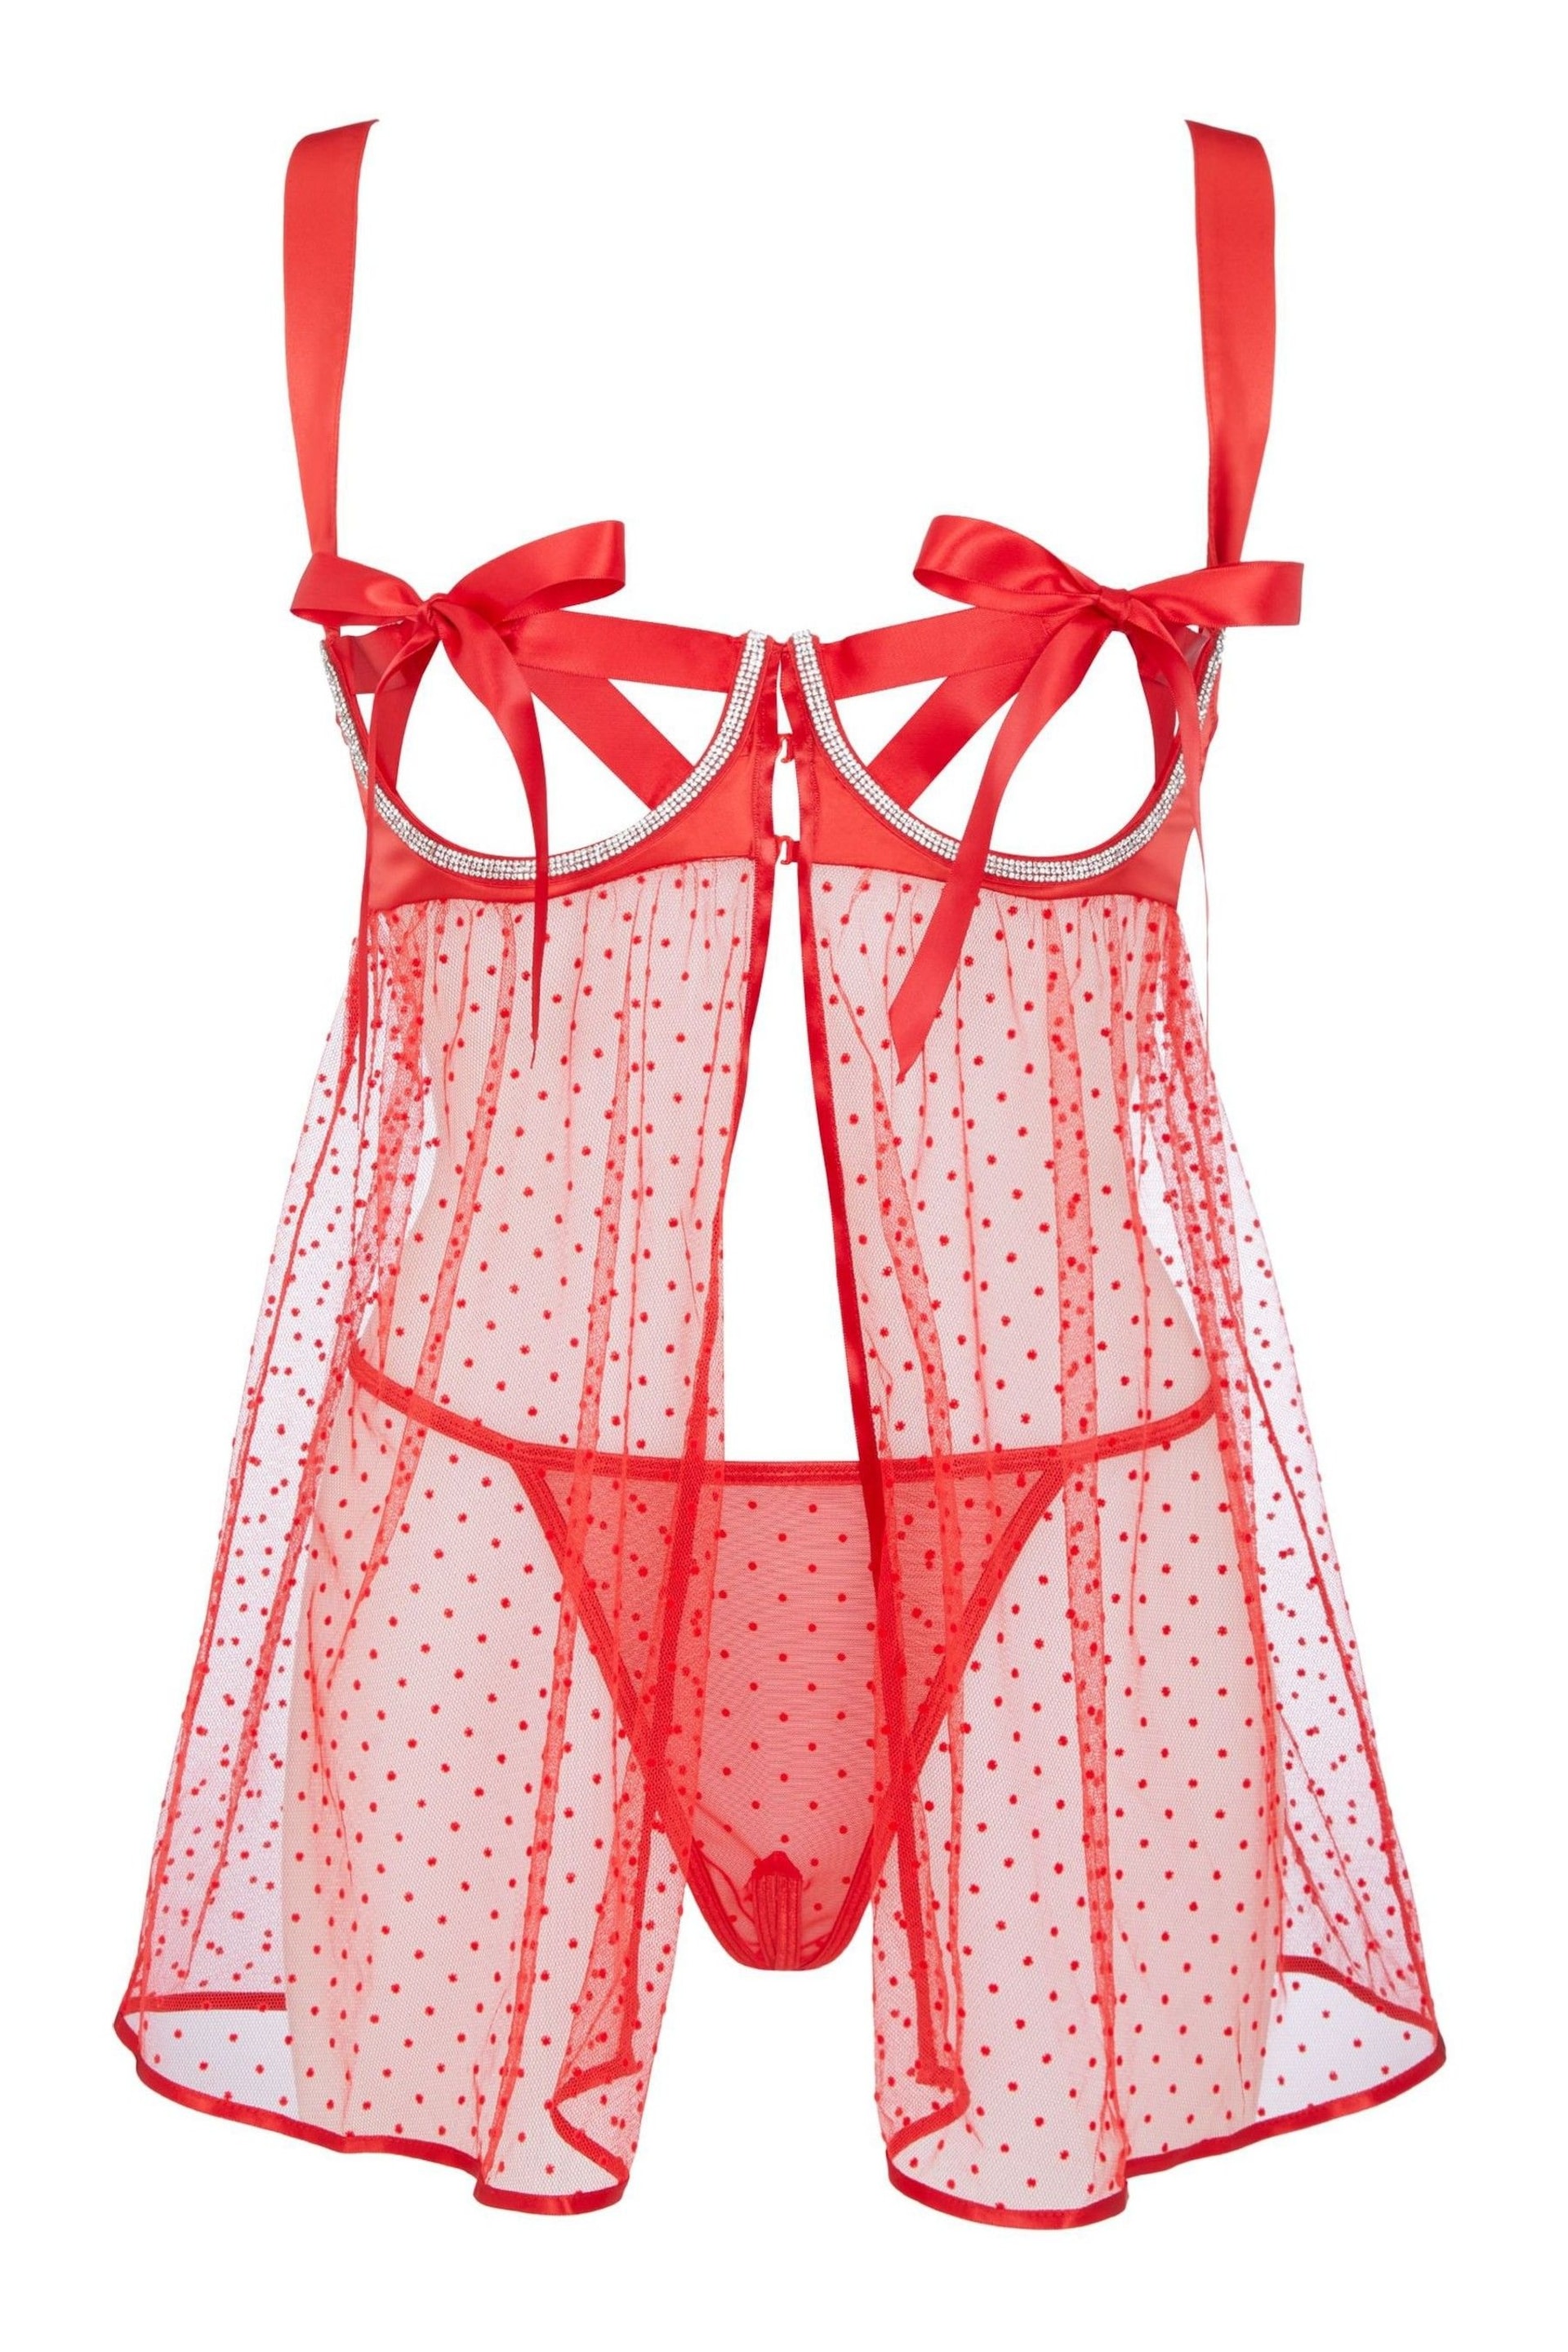 Ann Summers Red Unwrap Me Luxe Diamante Babydoll & Thong Set - Image 4 of 4